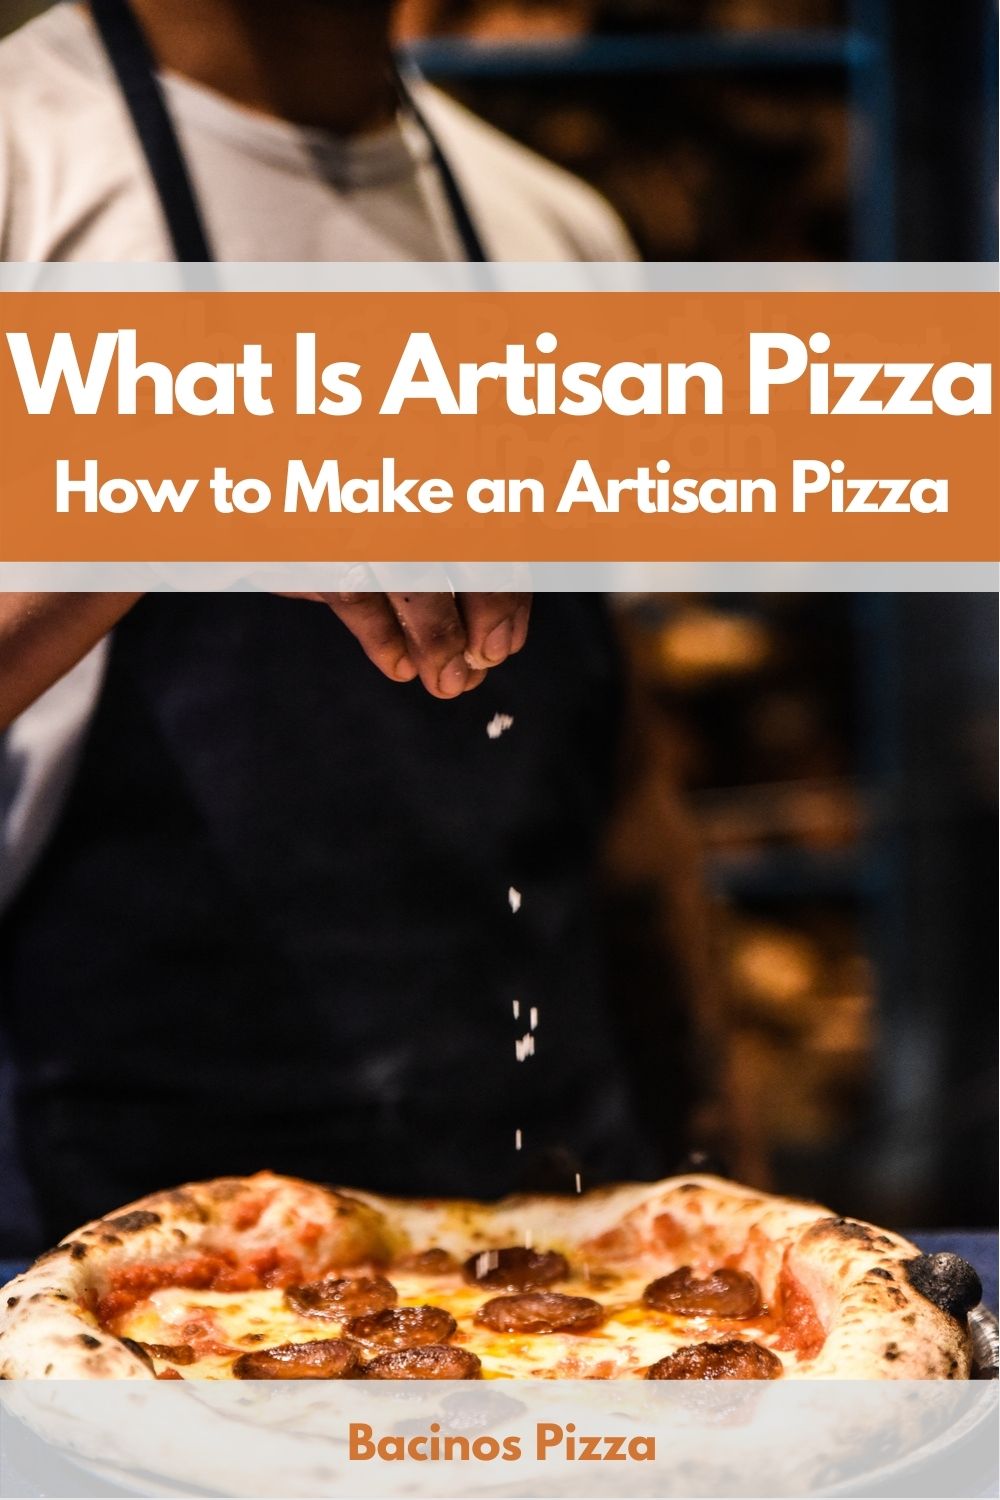 What Is Artisan Pizza How to Make an Artisan Pizza pin